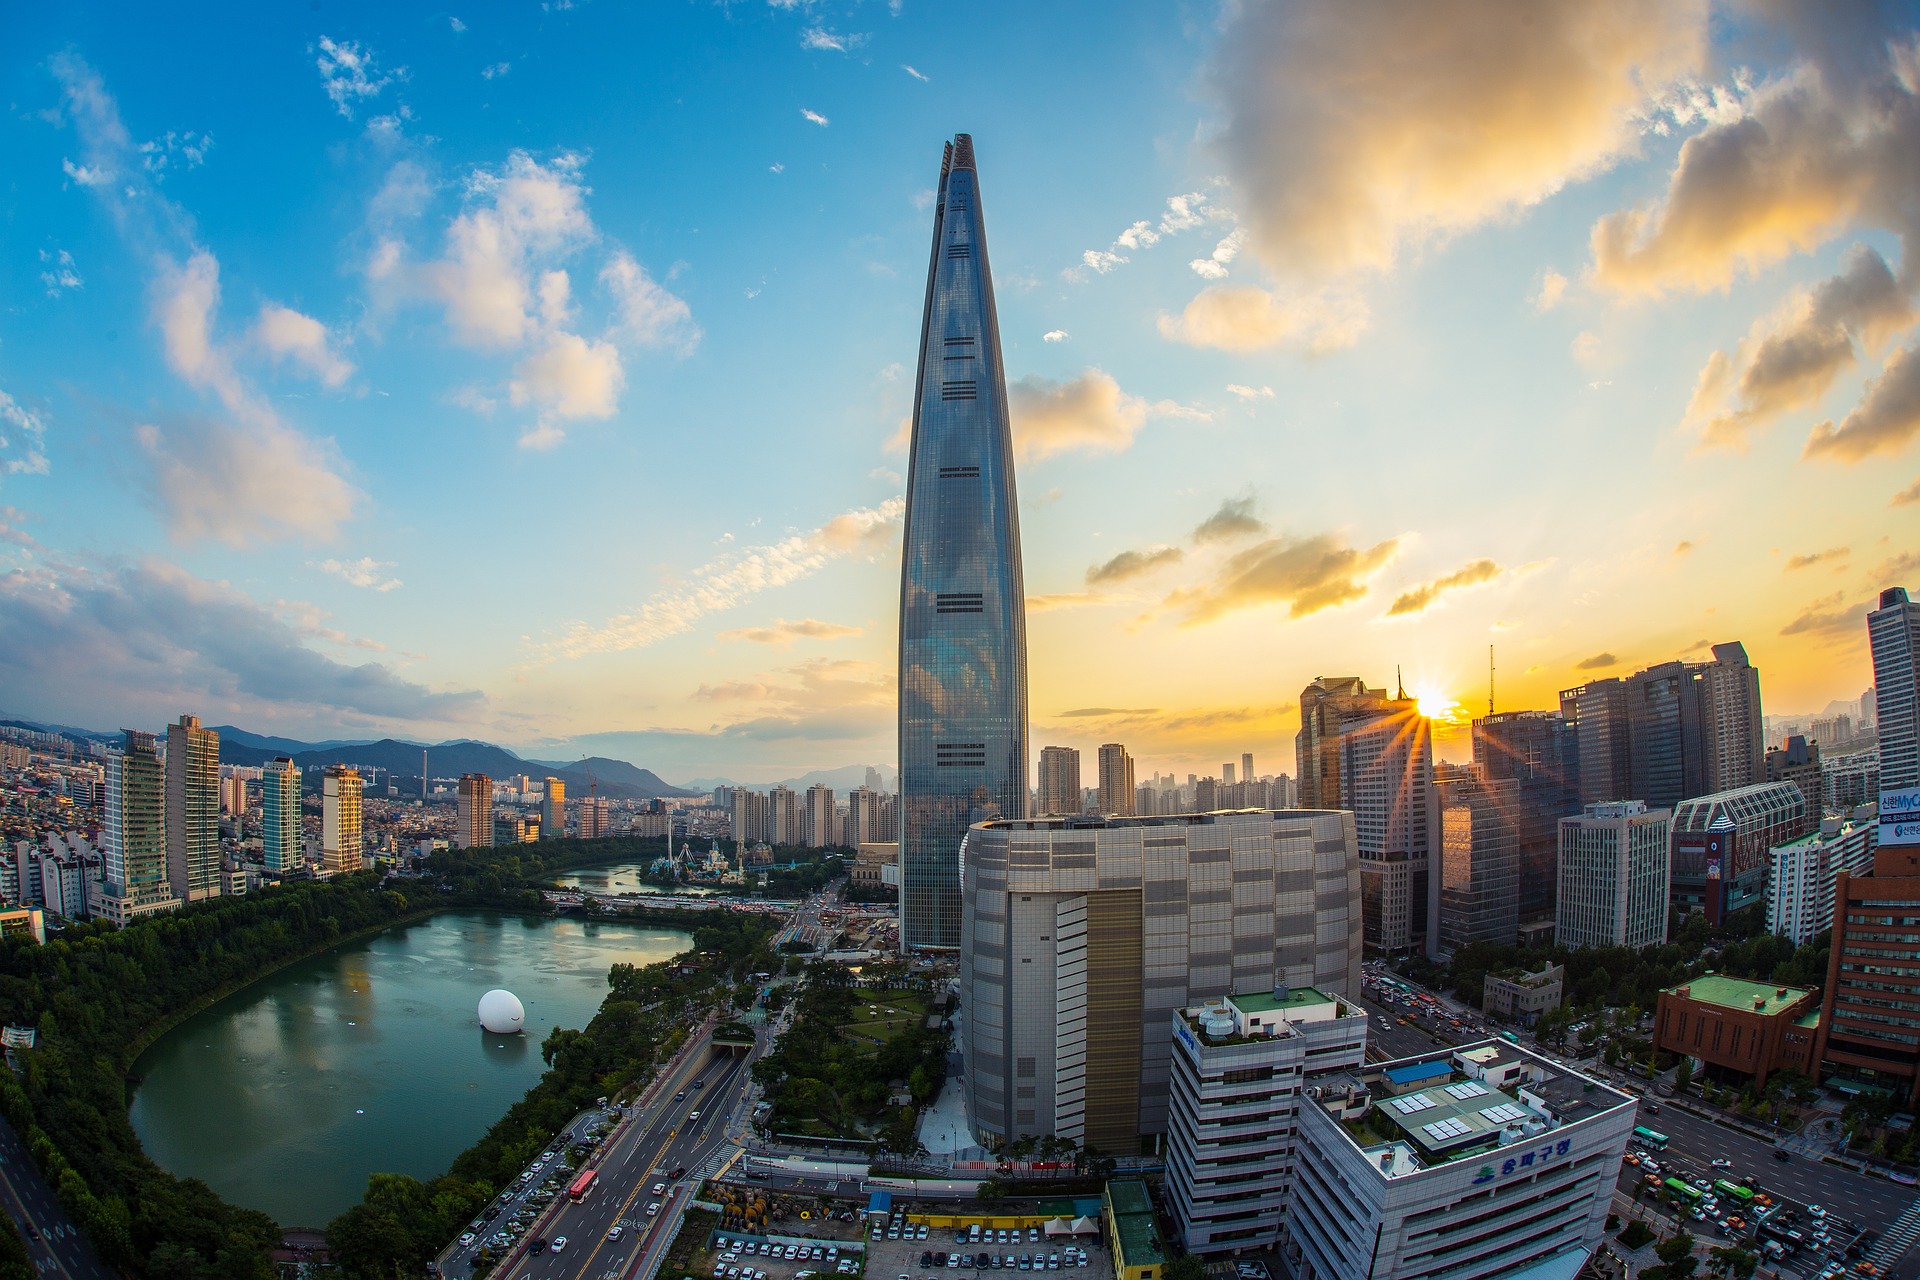 lotte-world-tower-1791802_1920